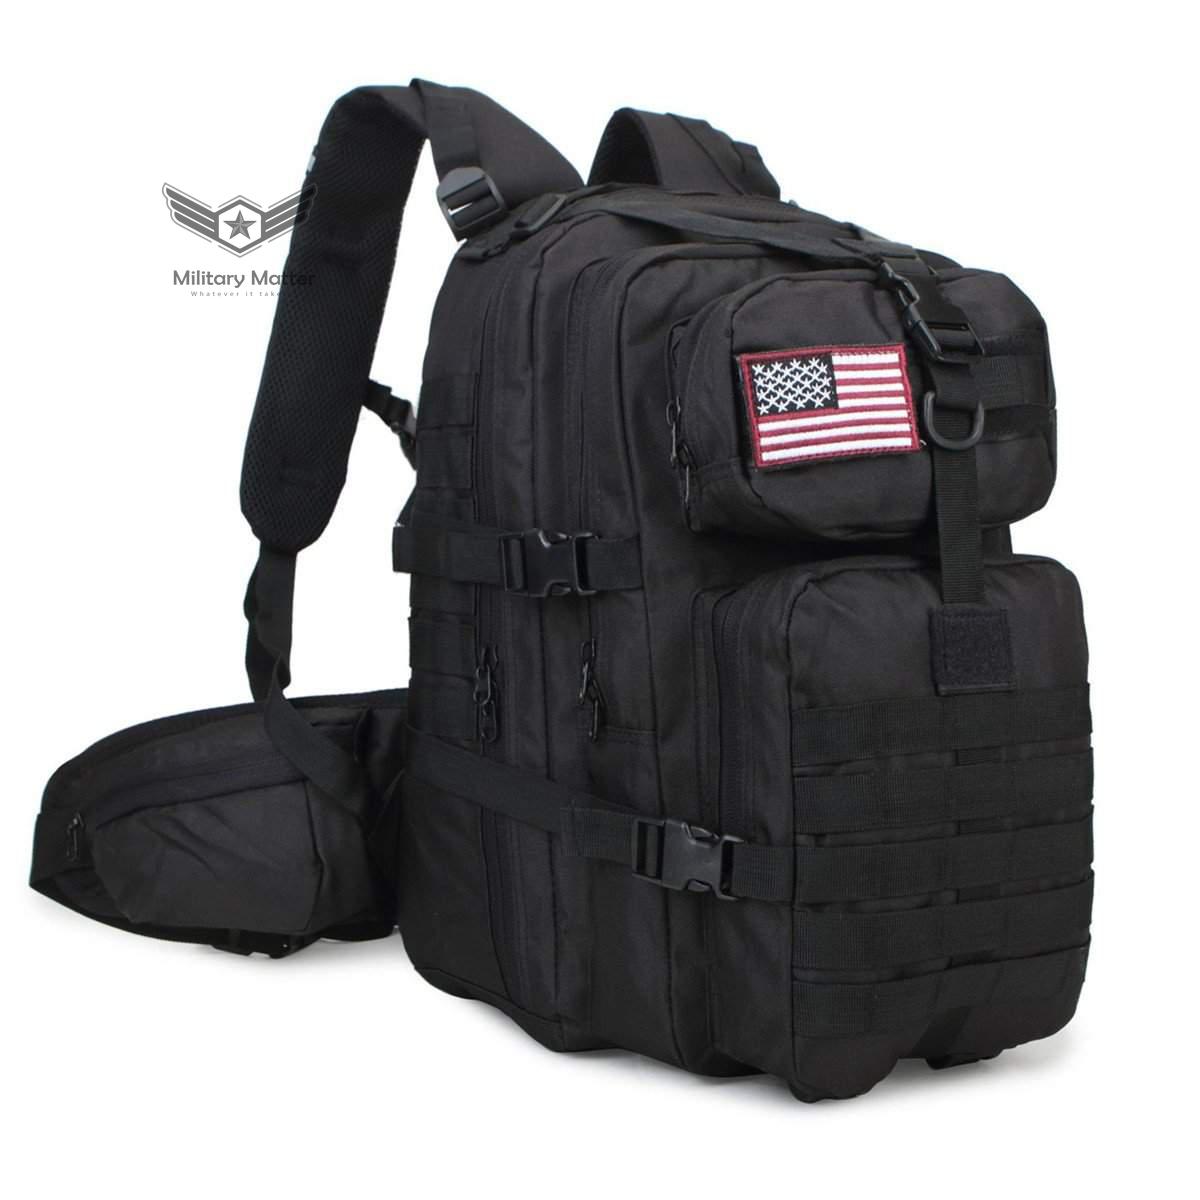  Military Matter Military Tactical Camping Backpack | The Best CS Tactical Clothing Store